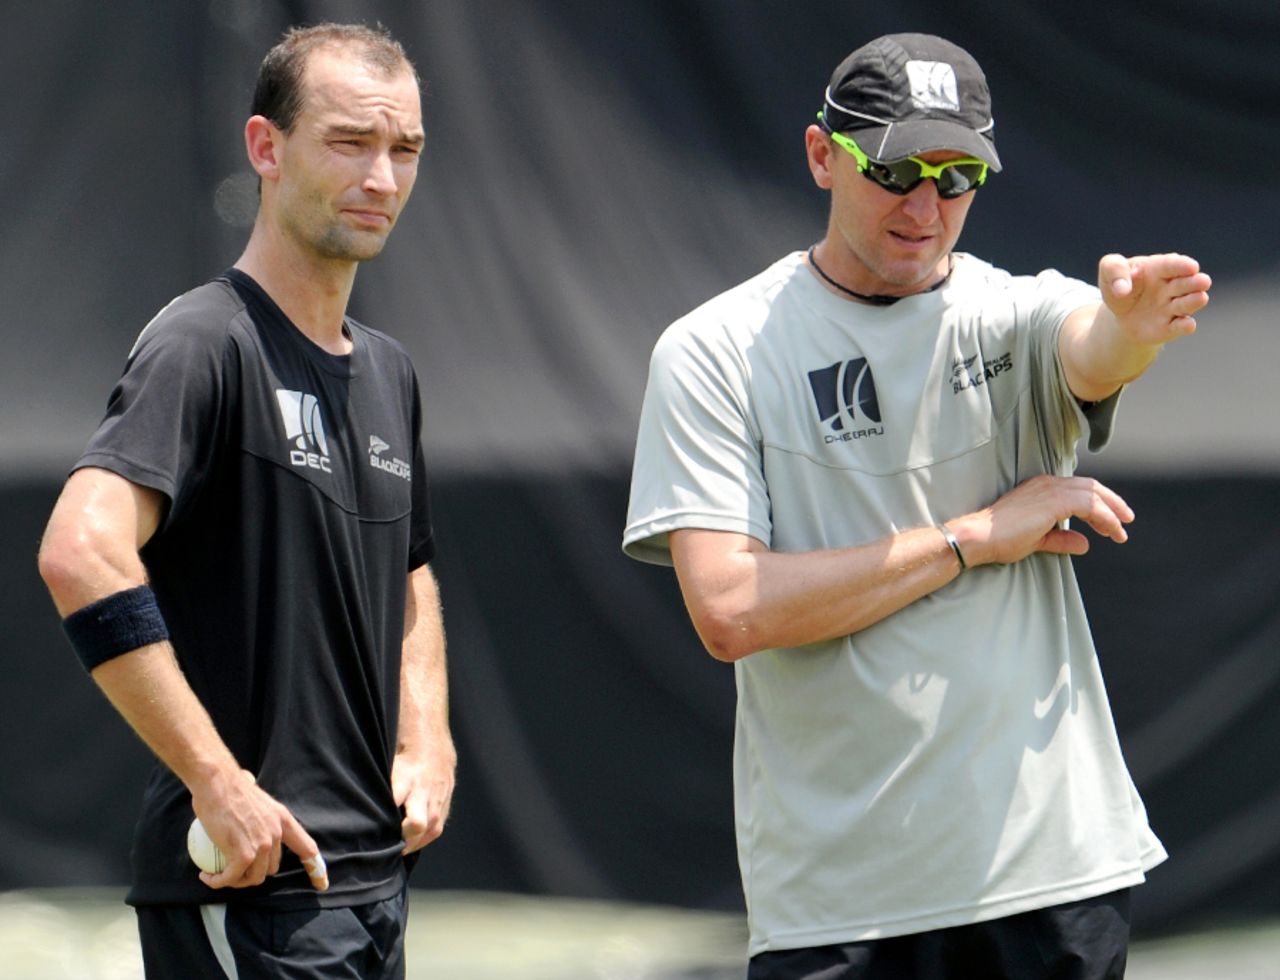 New Zealand bowling coach Allan Donald gives Andy McKay some tips, World Cup 2011, Colombo, March 27 2011